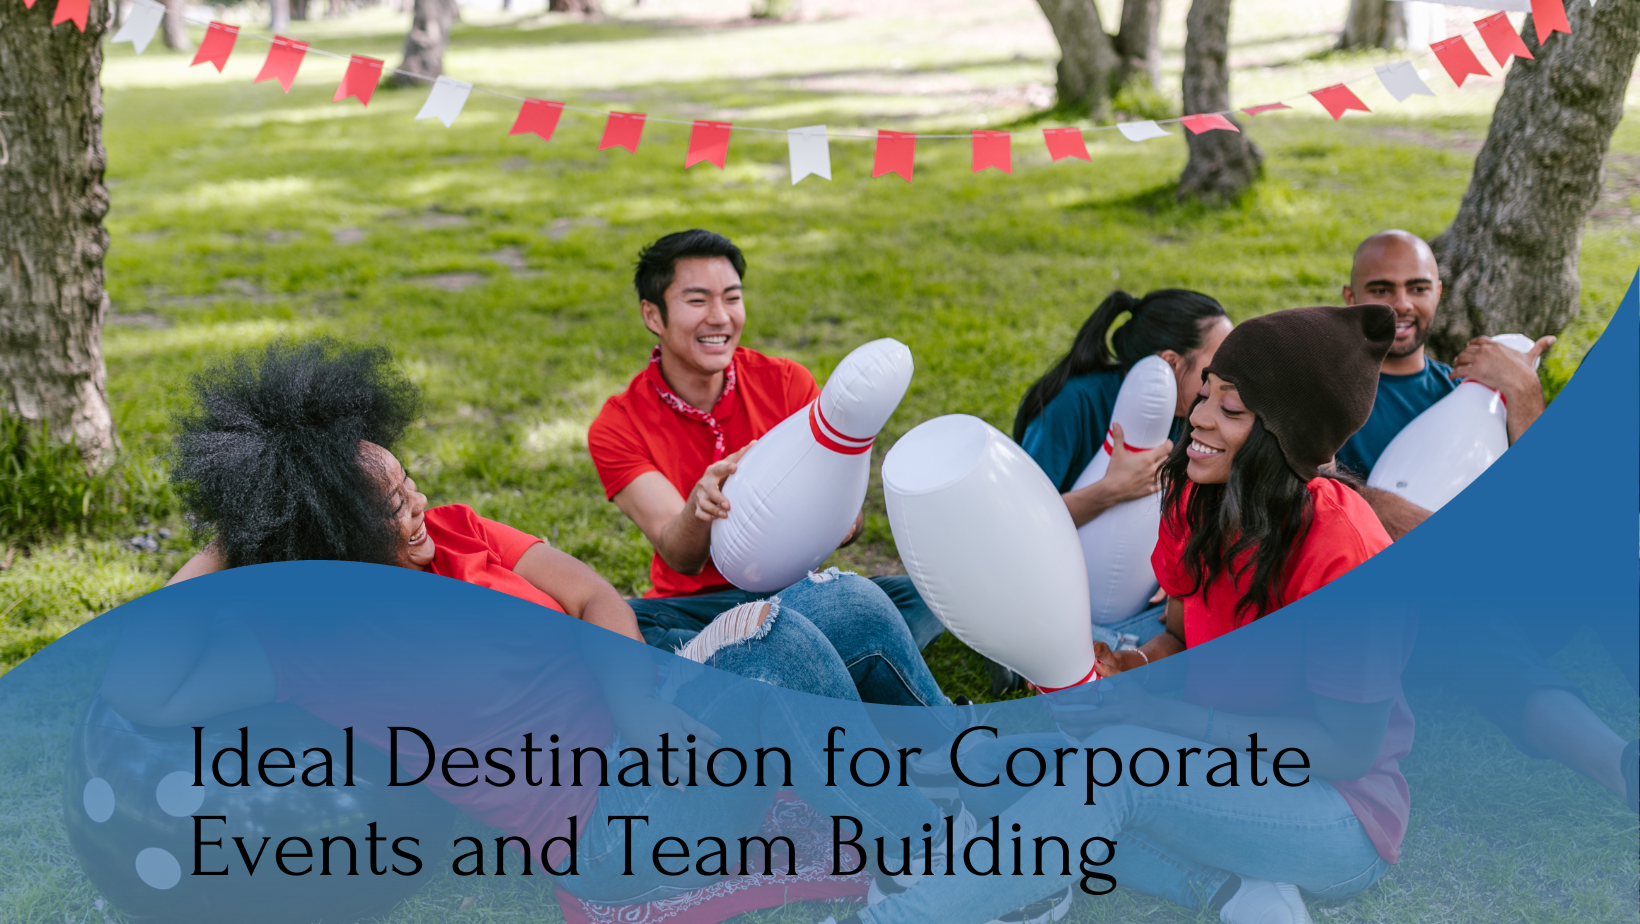 Ideal destination for corporate events and team building.